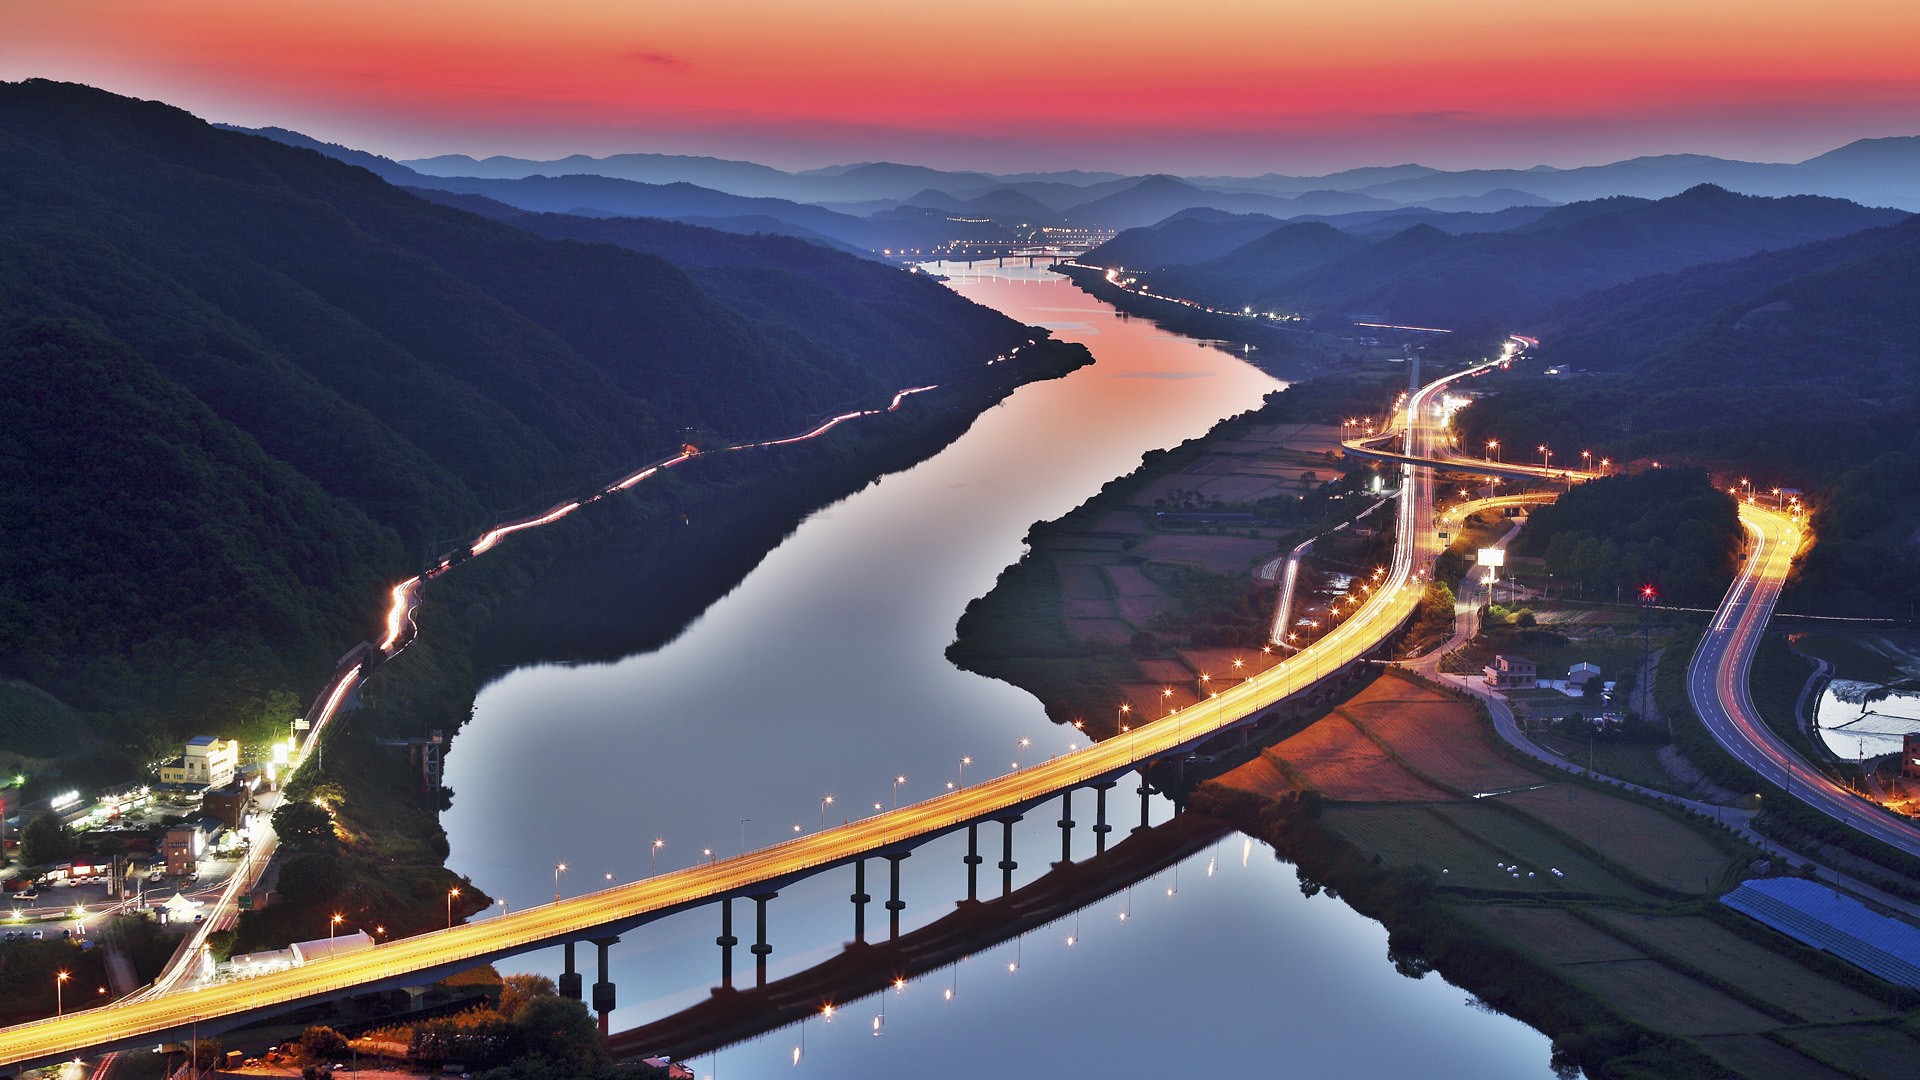 General 1920x1080 South Korea river light trails bridge hills sunset field nature landscape water evening trees traffic lights forest road mist morning reflection long exposure town building lights mountains aerial view photography street light Asia